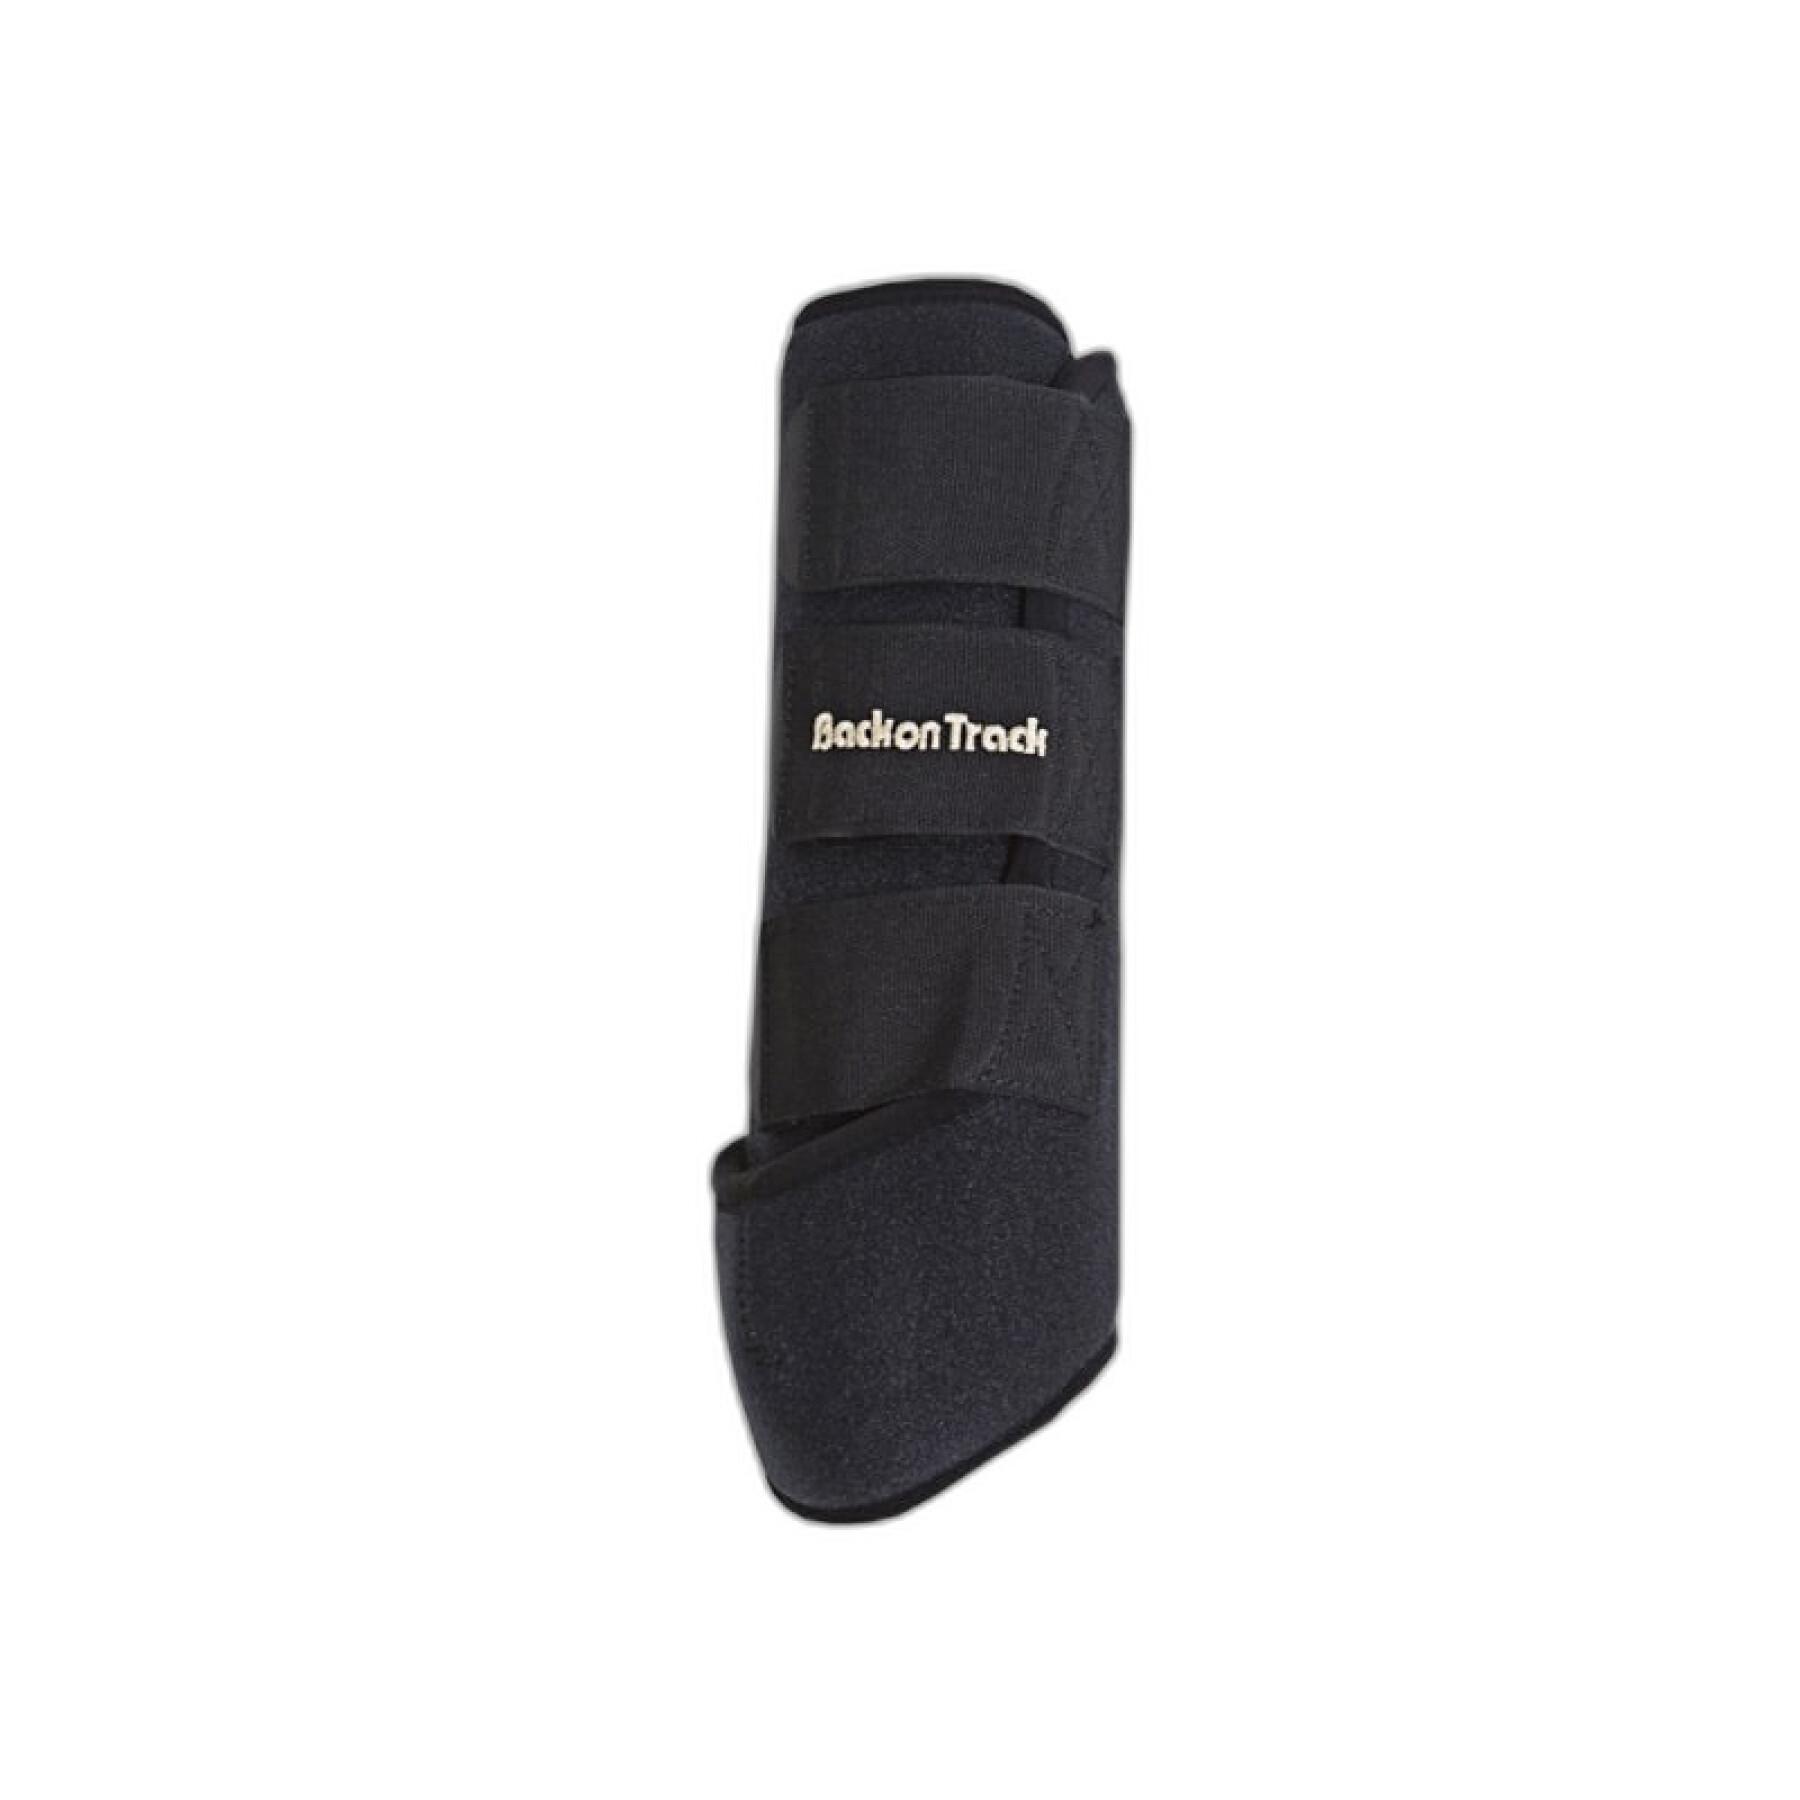 Closed rear work gaiters for horses Back on Track